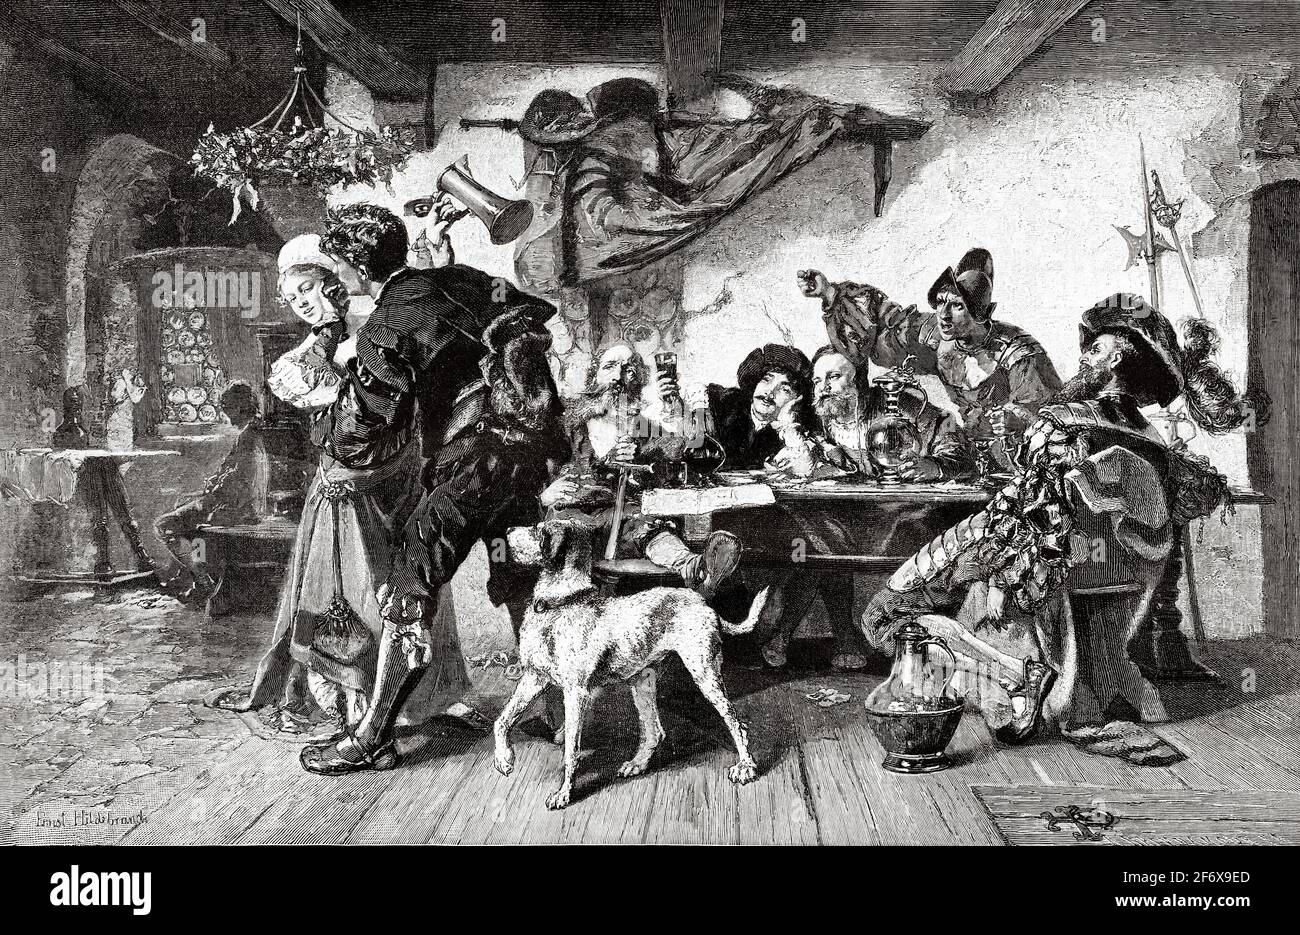 Soldiers of the middle ages drinking eating and having fun in a tavern by Eduard Hildebrandt (1818-1868) German landscape painter. Old 19th century engraved illustration from El Mundo Ilustrado 1879 Stock Photo